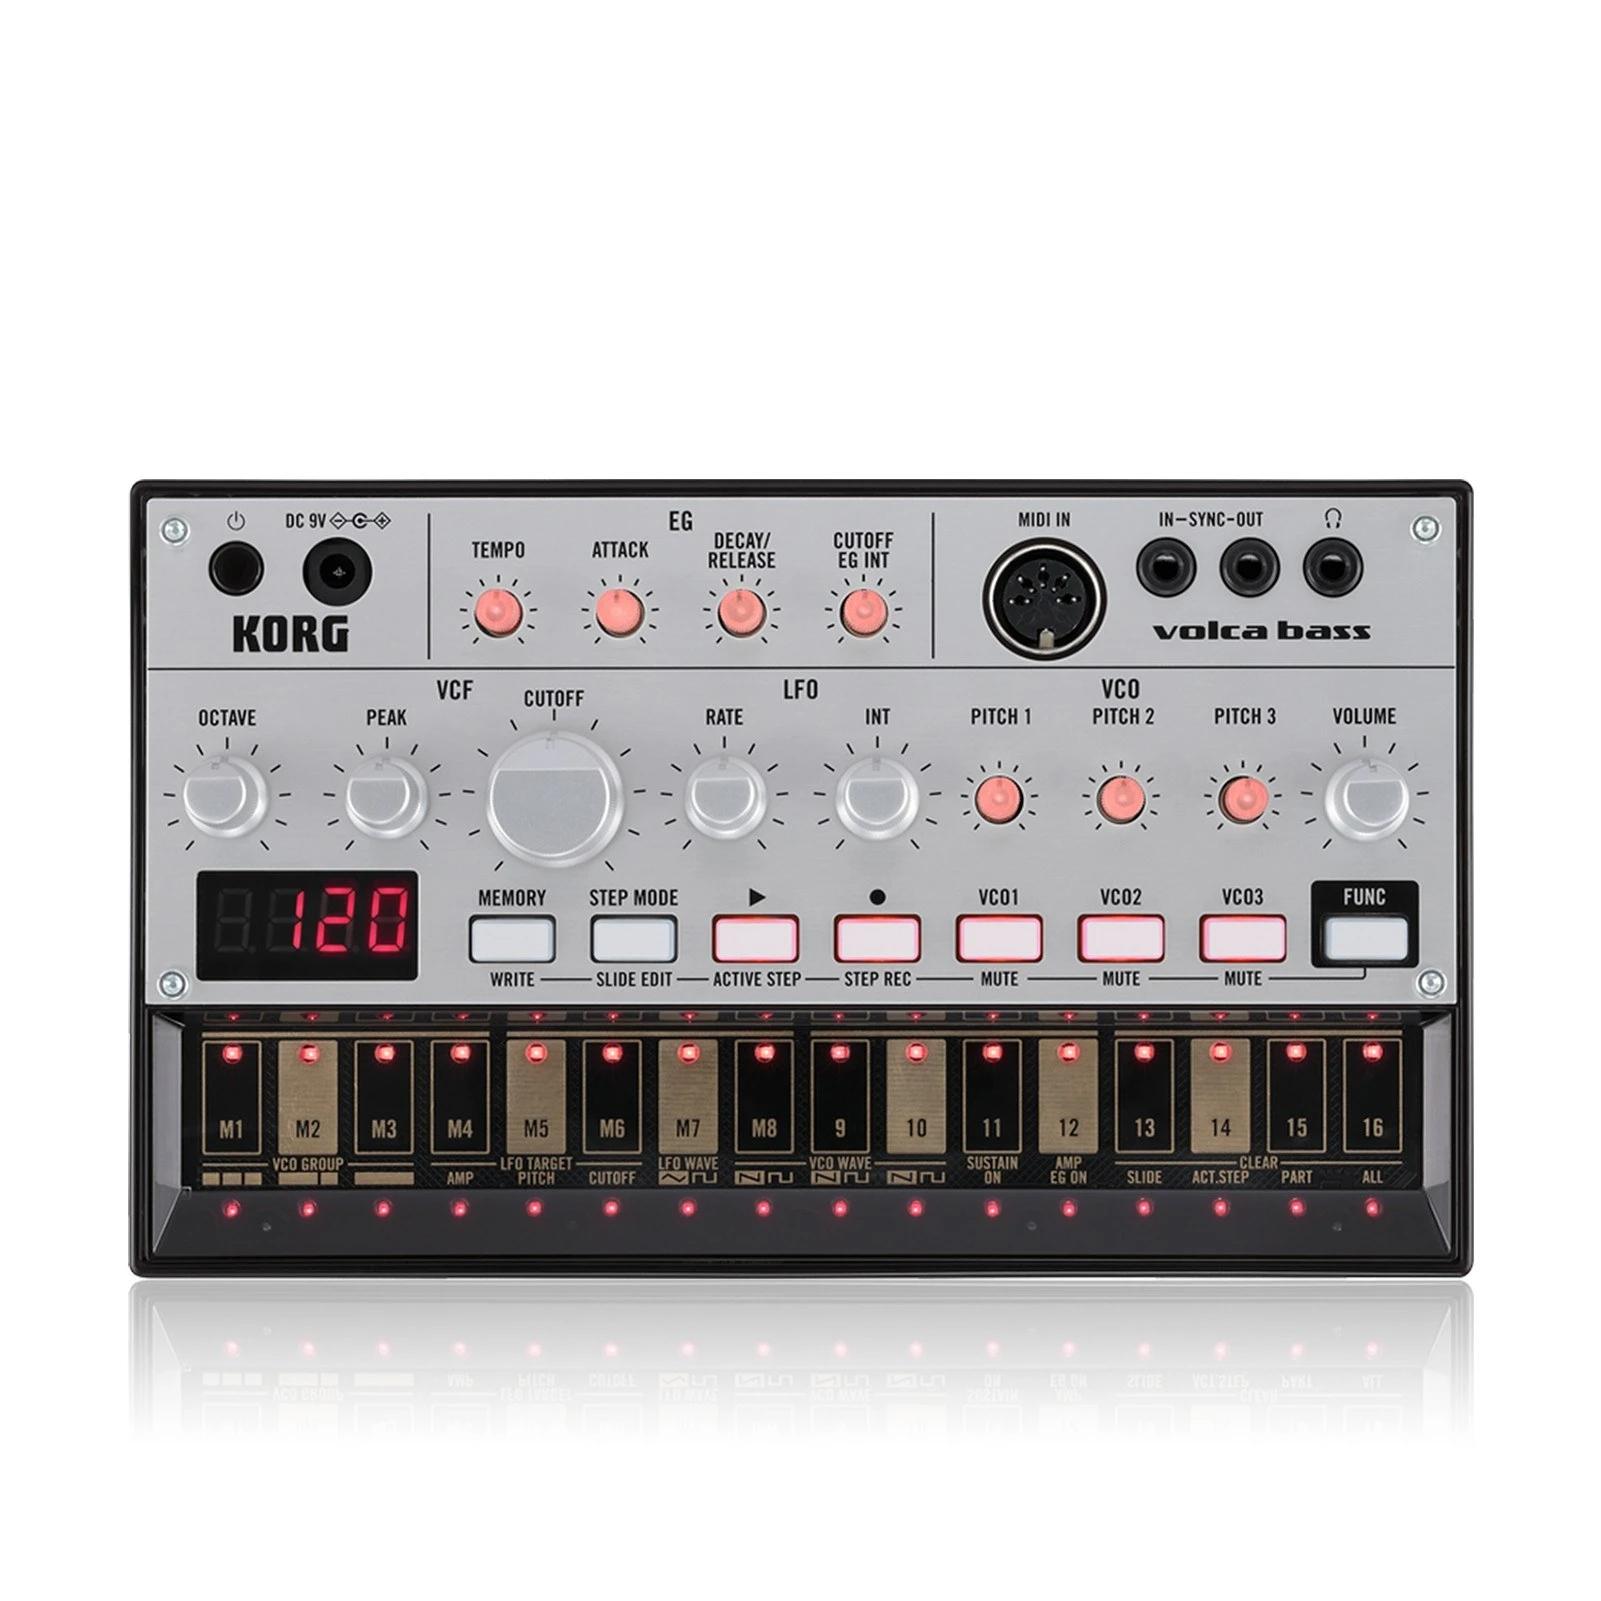 Analog Bass Machine 16 Keys Step Sequencer Touch Slide Active Self-tuning with MIDI In Sync Jack